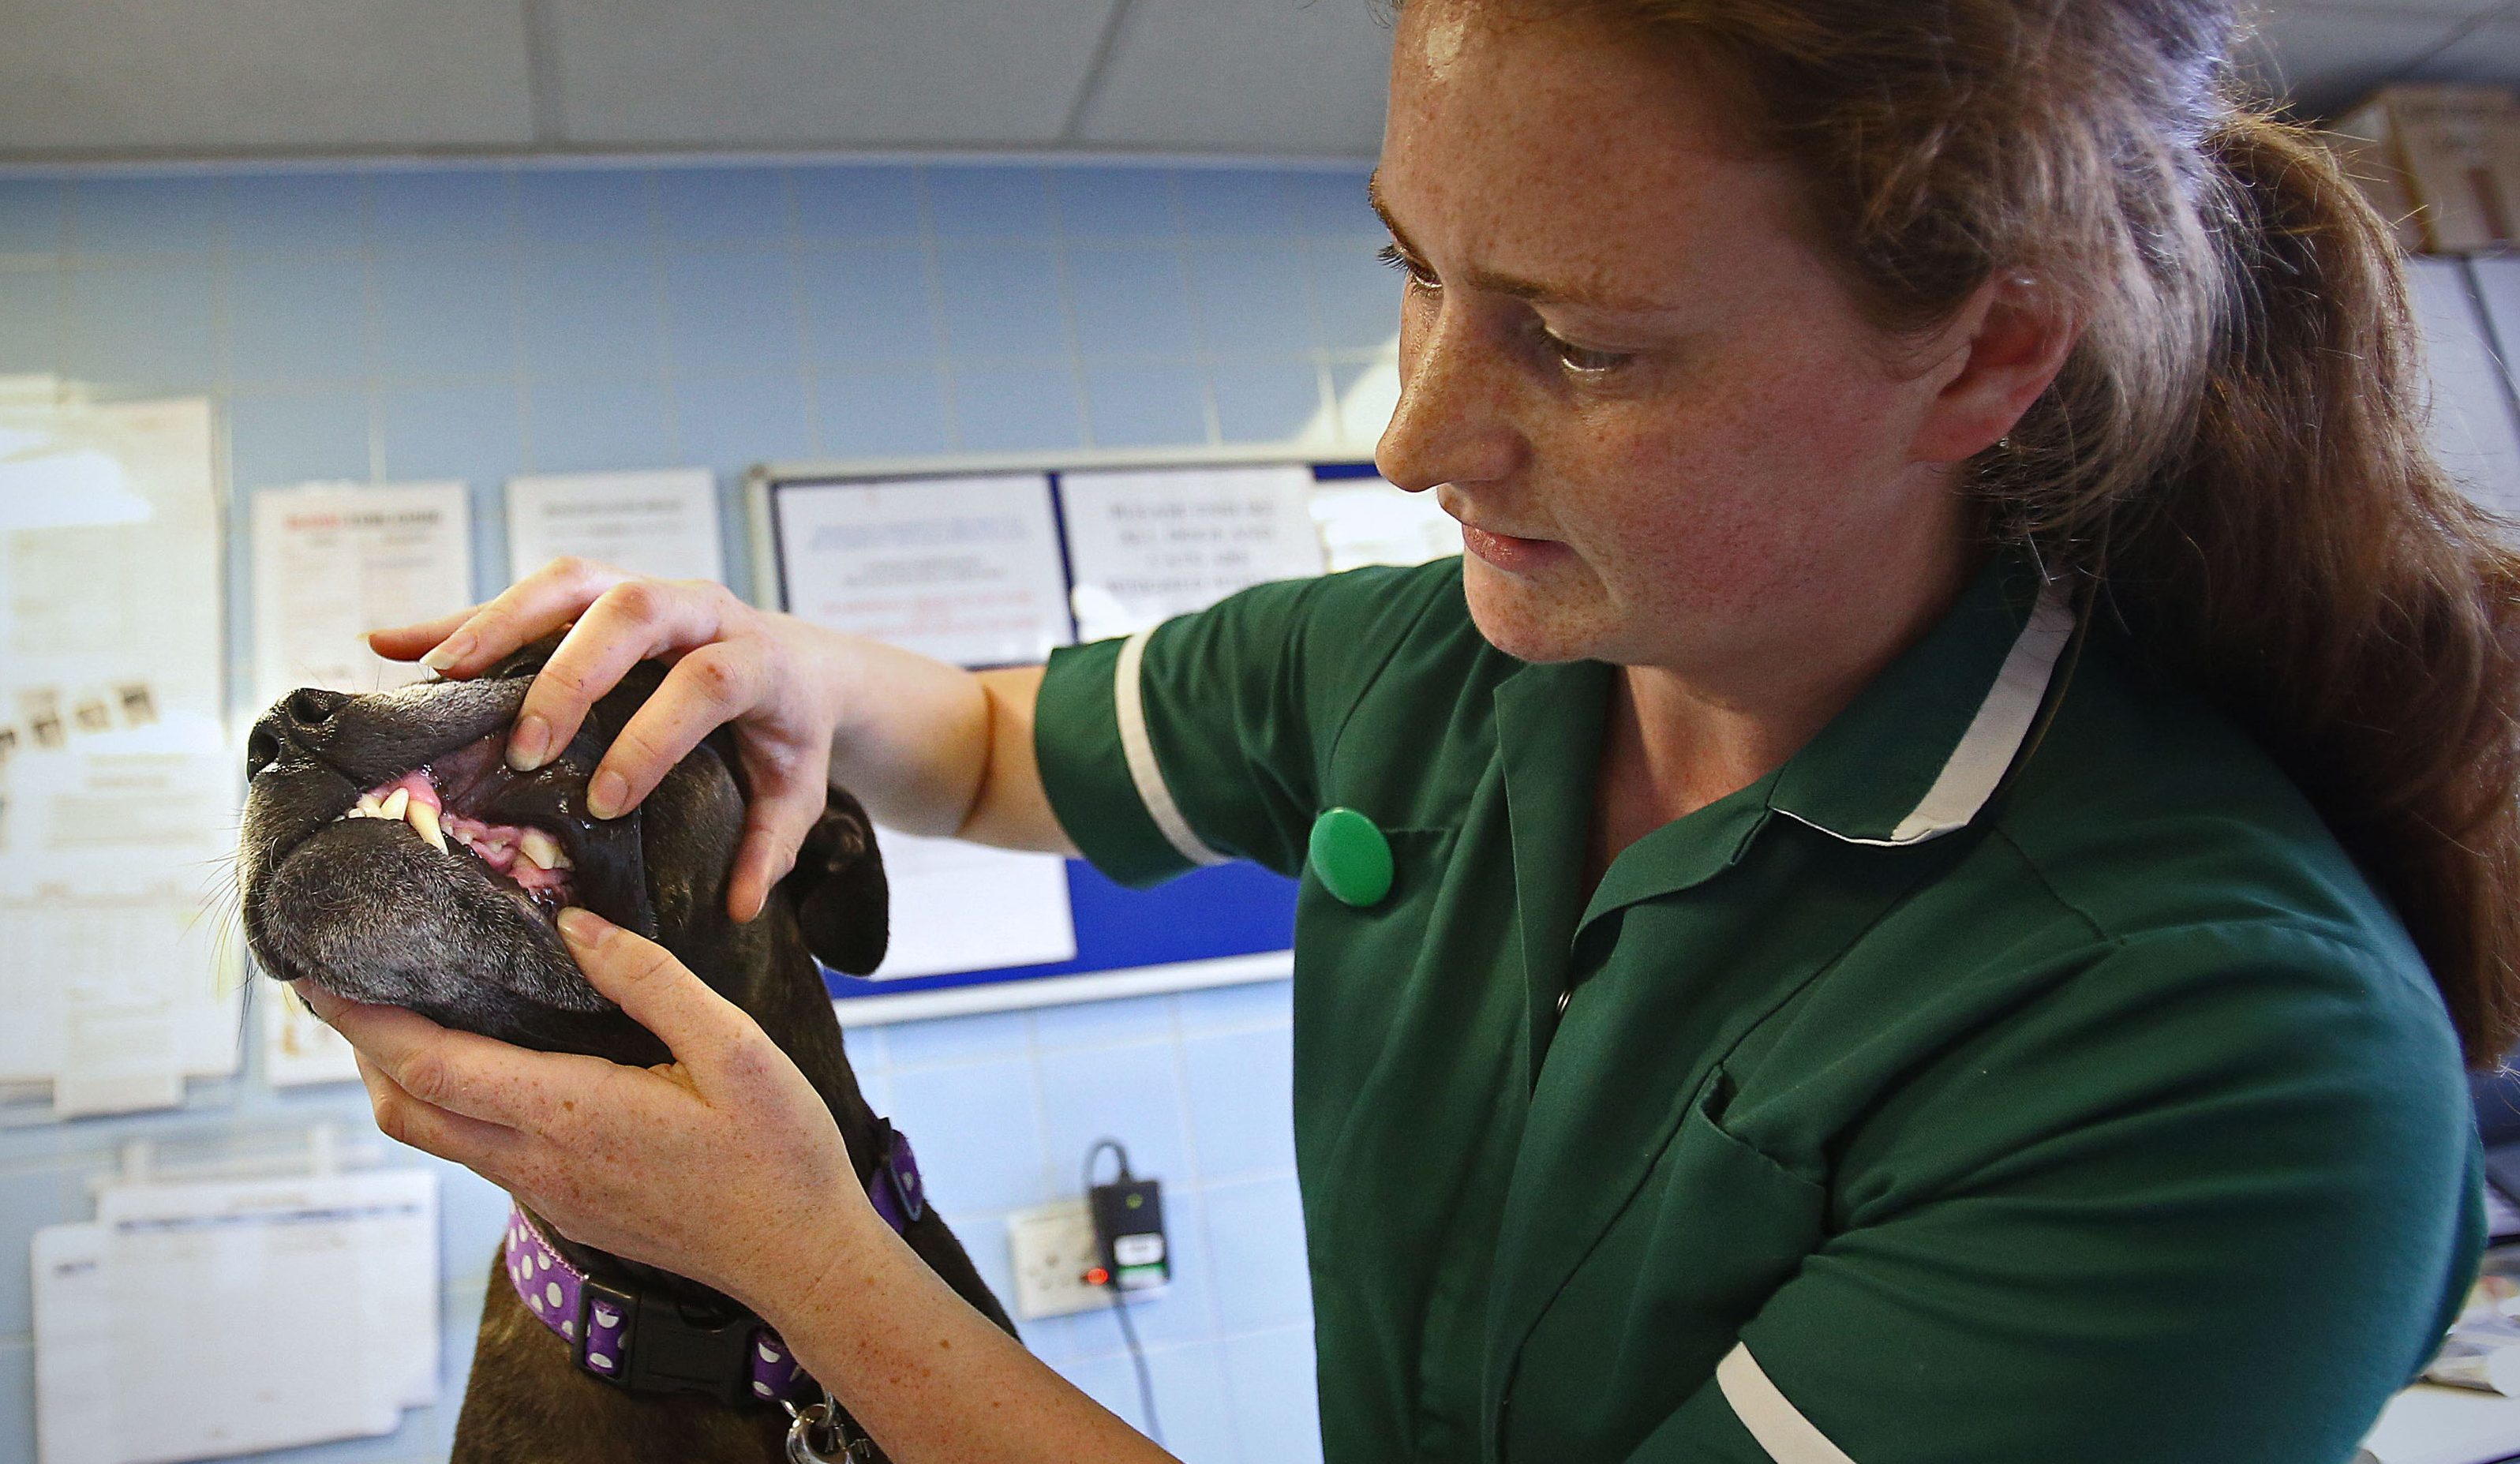 Data gathered by the British Veterinary Association (BVA) showed that 85% of vets questioned said they or a member of their team had felt threatened by someone's language or behaviour. (Philip Toscano/PA Wire)